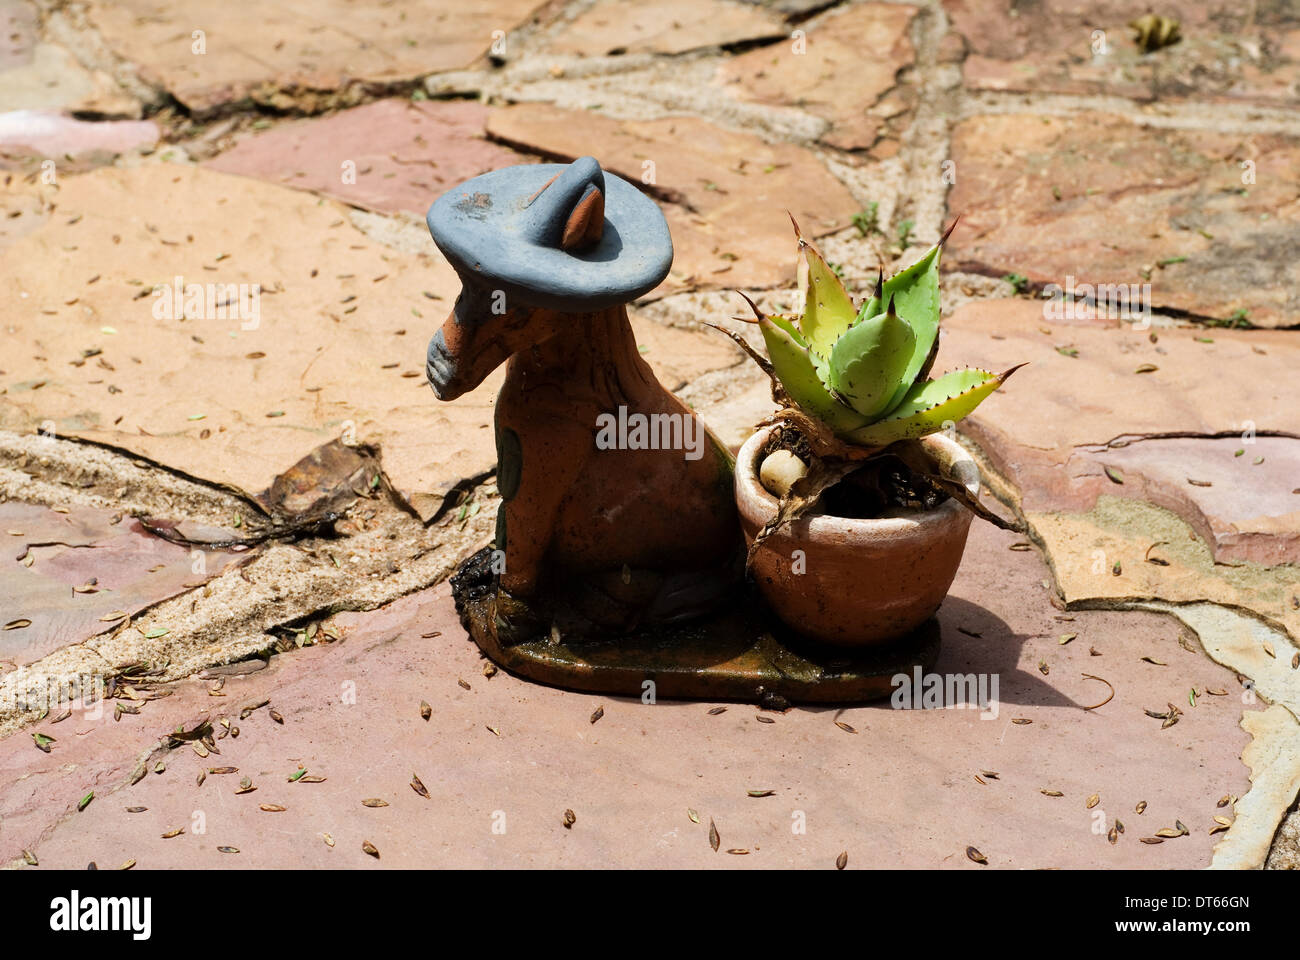 Small miniature cactus plant in ornamental pot outdoors. Stock Photo